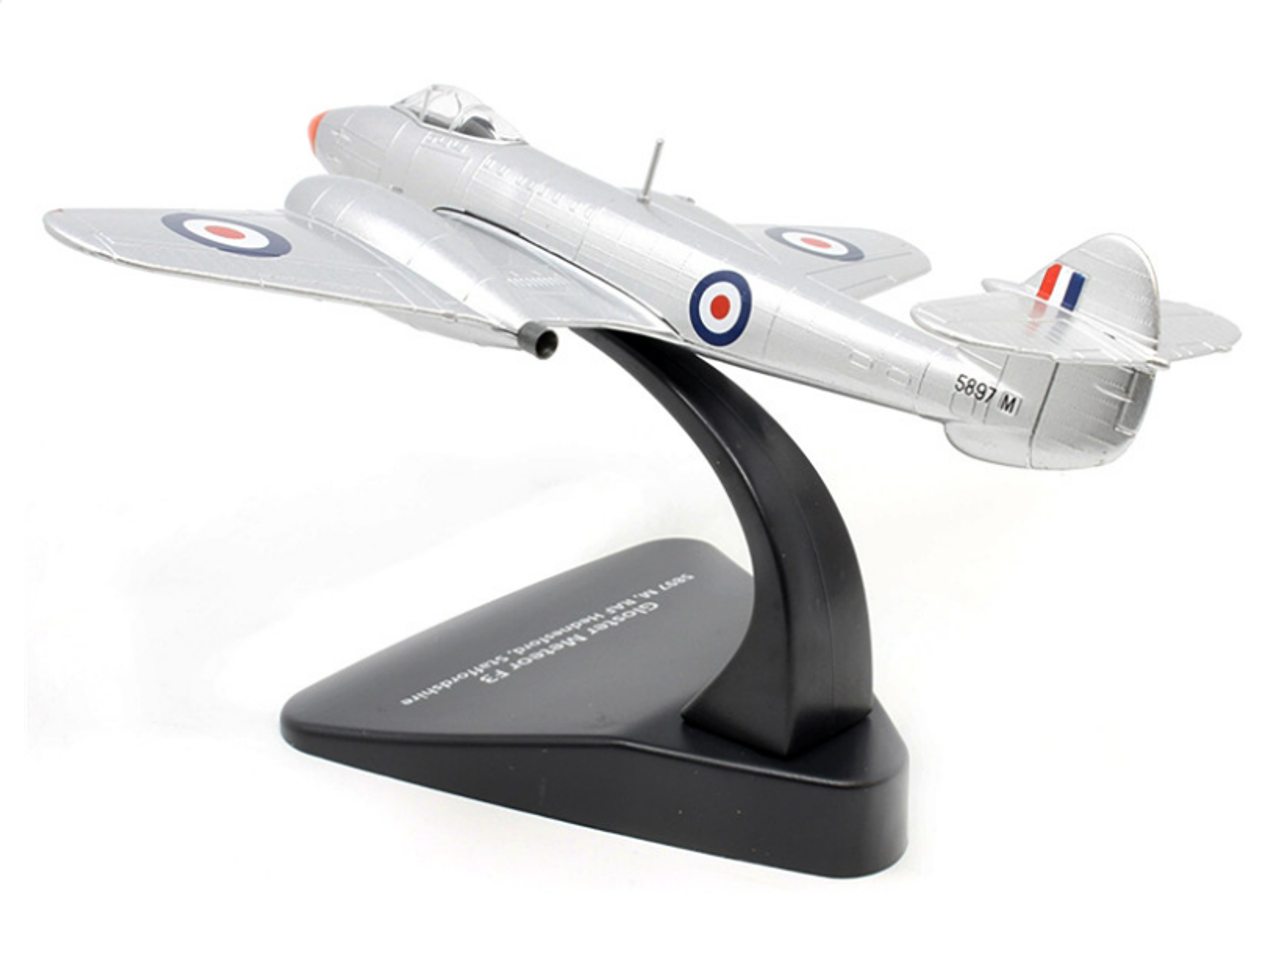 Gloster Meteor F3 Jet Fighter 5897 M RAF Hednesford Staffordshire England "Oxford Aviation" Series 1/72 Diecast Model Aircraft by Oxford Diecast